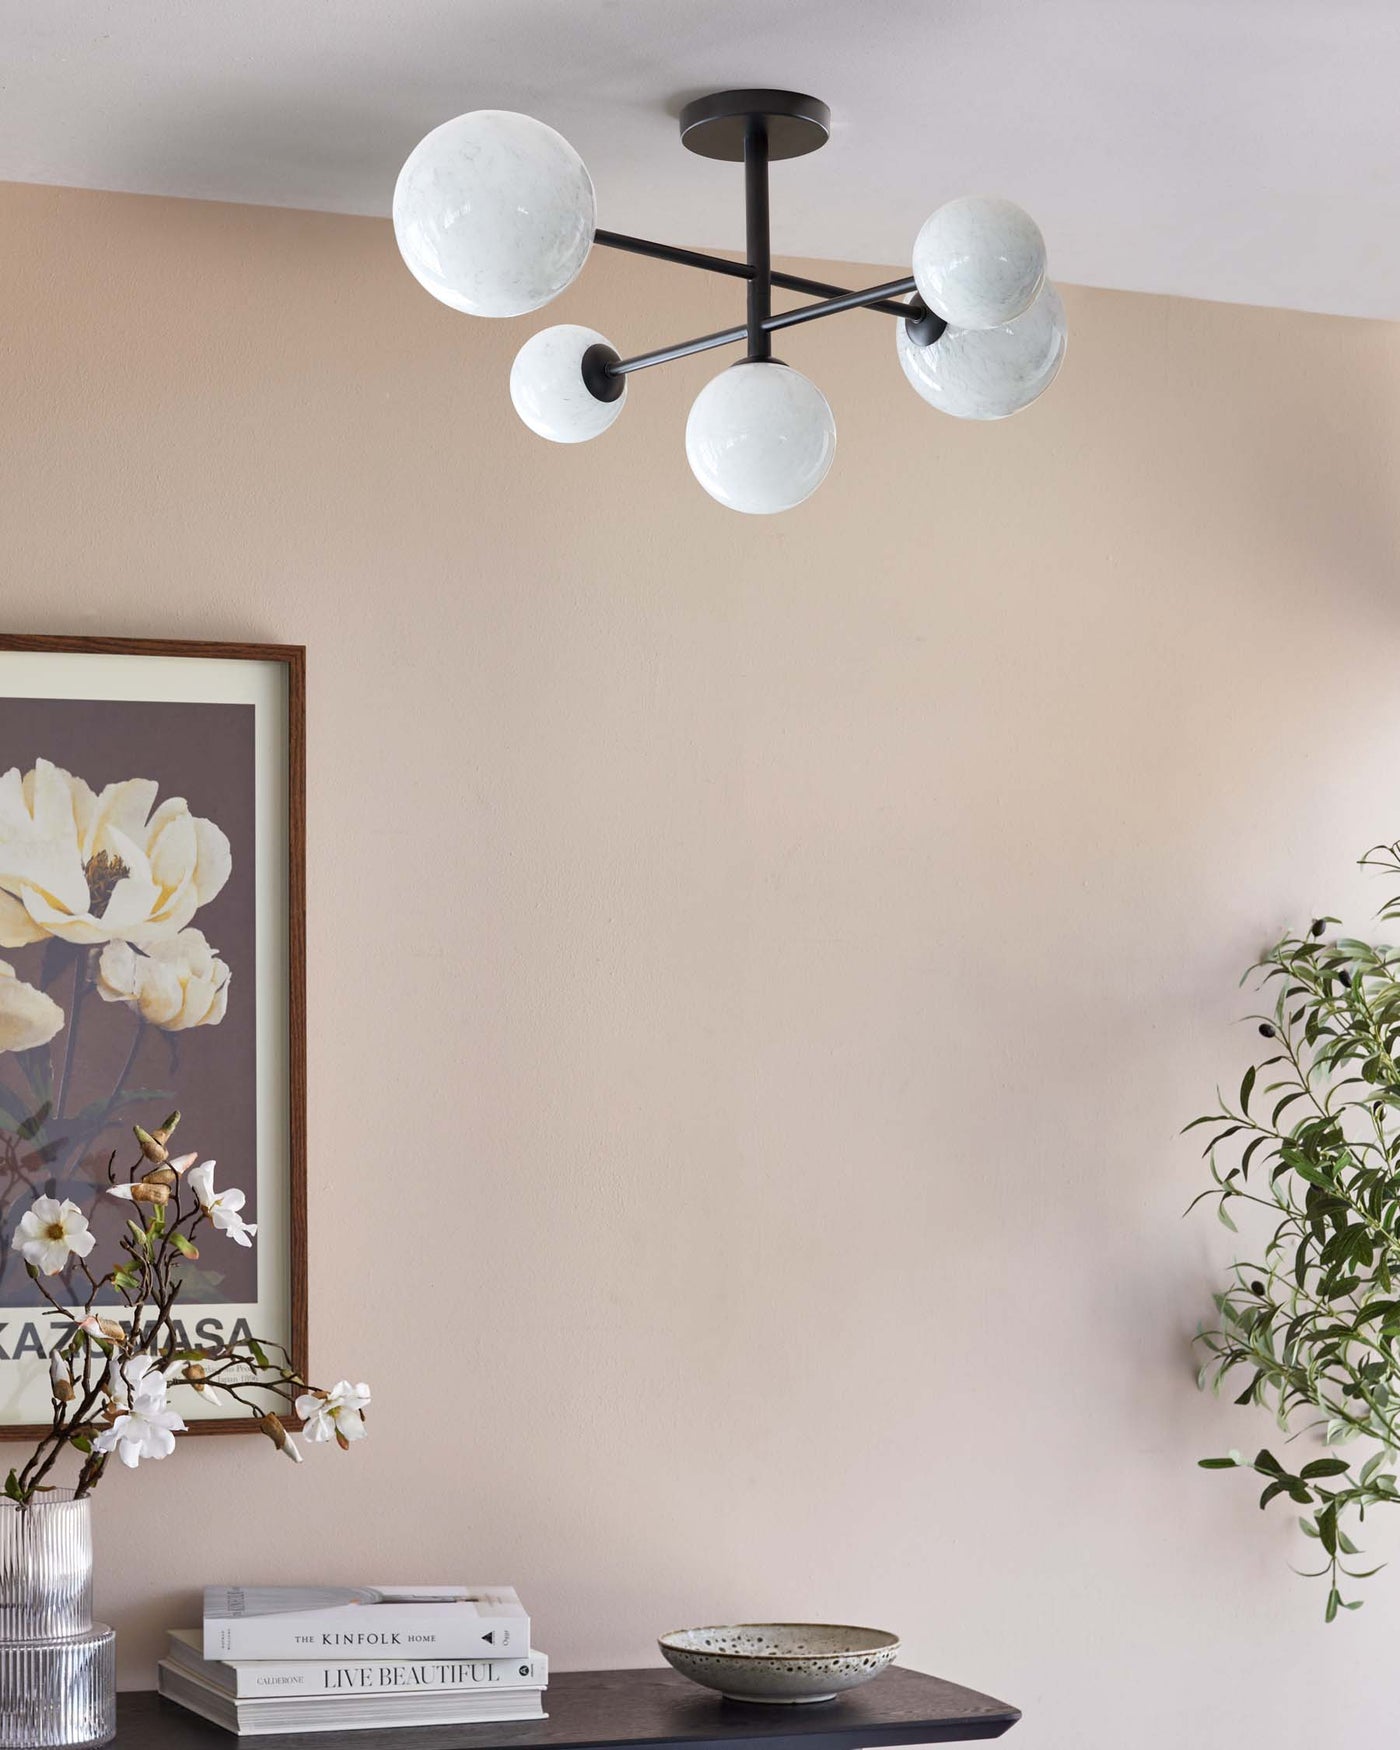 Modern black metal ceiling light fixture with multiple opaque white globes, set against a beige wall, above a dark wooden shelf displaying decorative items such as books, a flower vase, and a ceramic bowl.